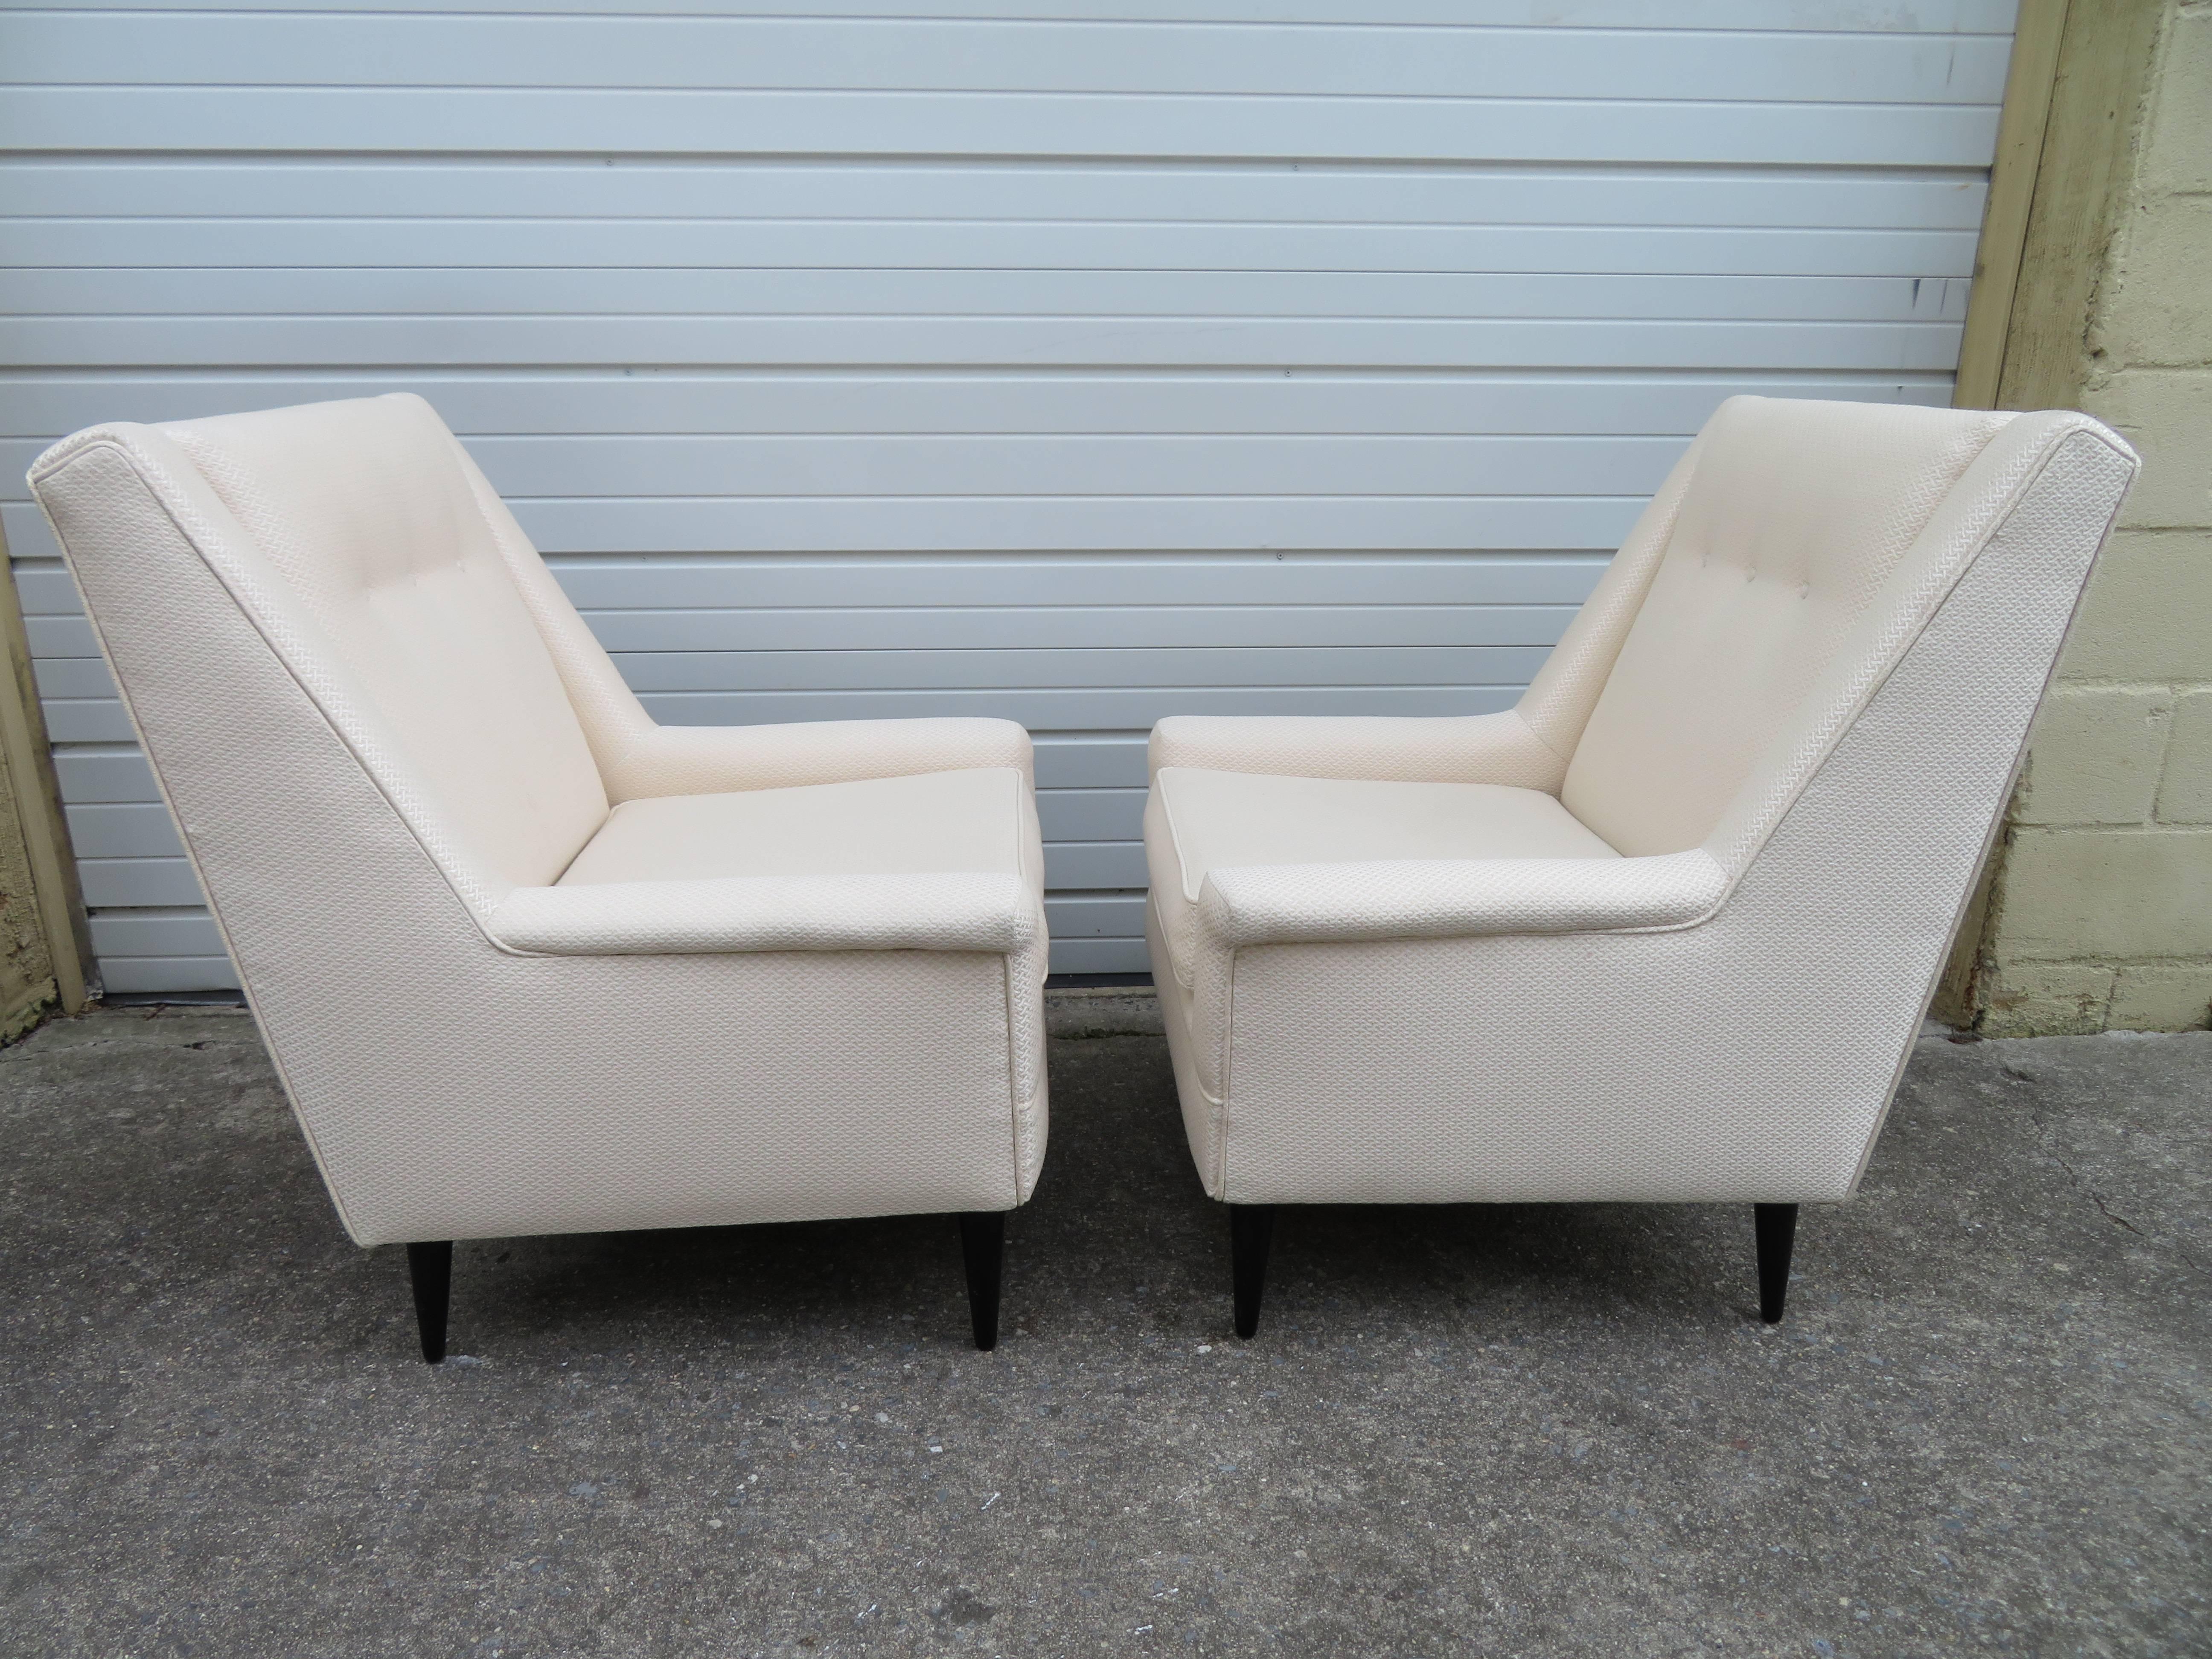 Gorgeous pair of Harvey Probber style tall back lounge chairs. The original fabric is in very nice condition-very comfortable. Legs retain their original black lacquered finish-minor scuffs.